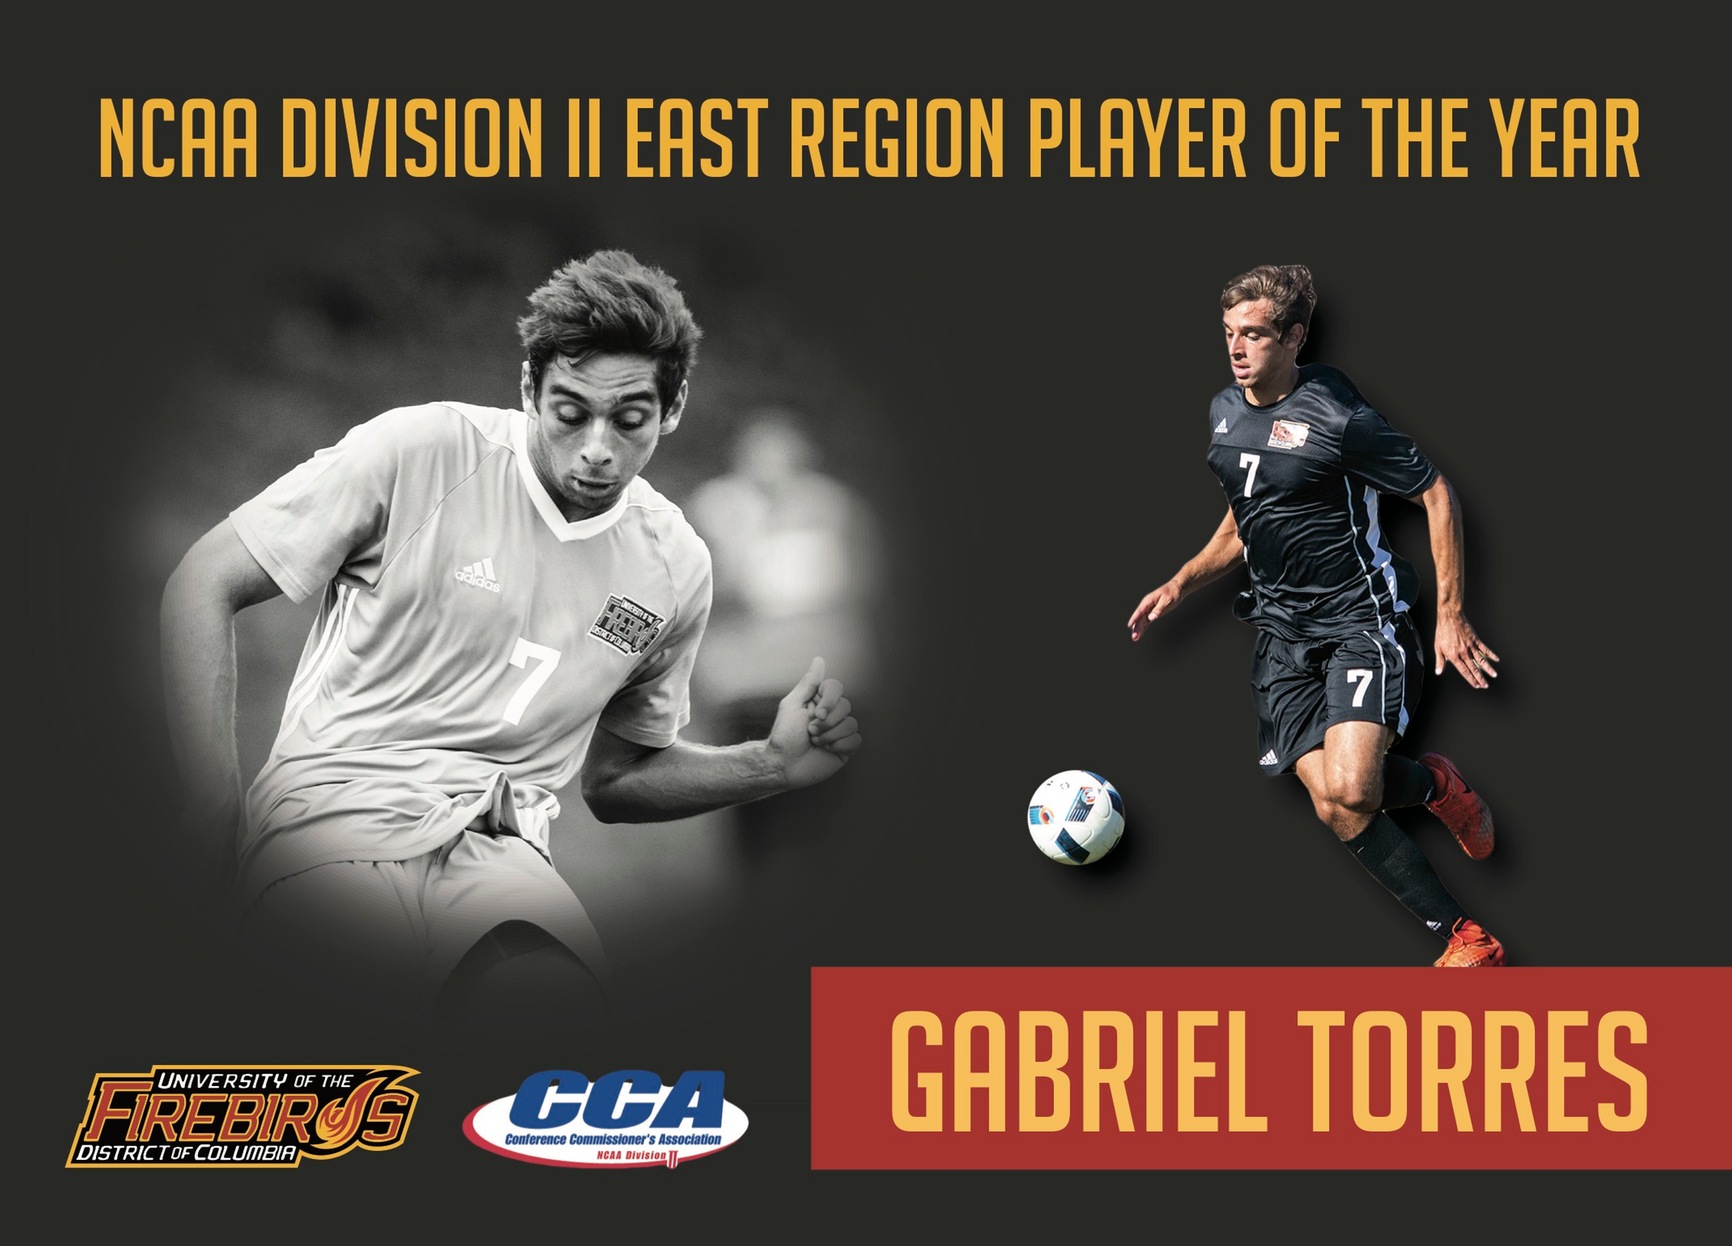 Gabriel Torres Named 2017 NCAA Division II Conference Commissioner’s Association East Region Player of the Year